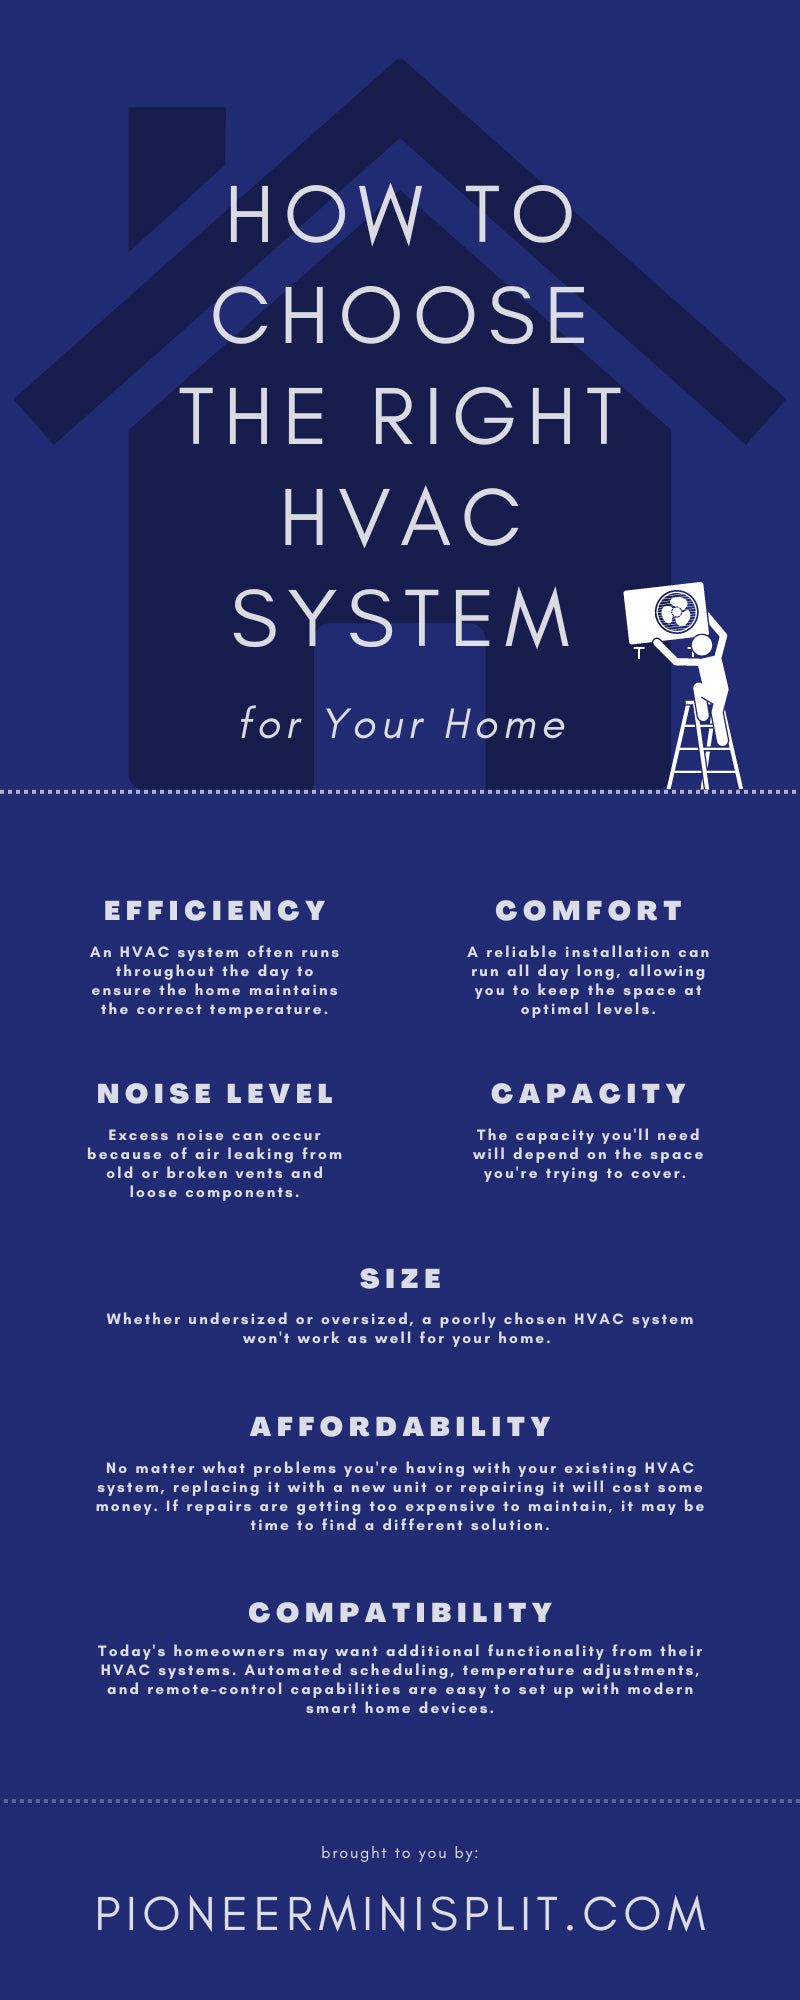 Tips for Choosing the Right HVAC System for Your Home